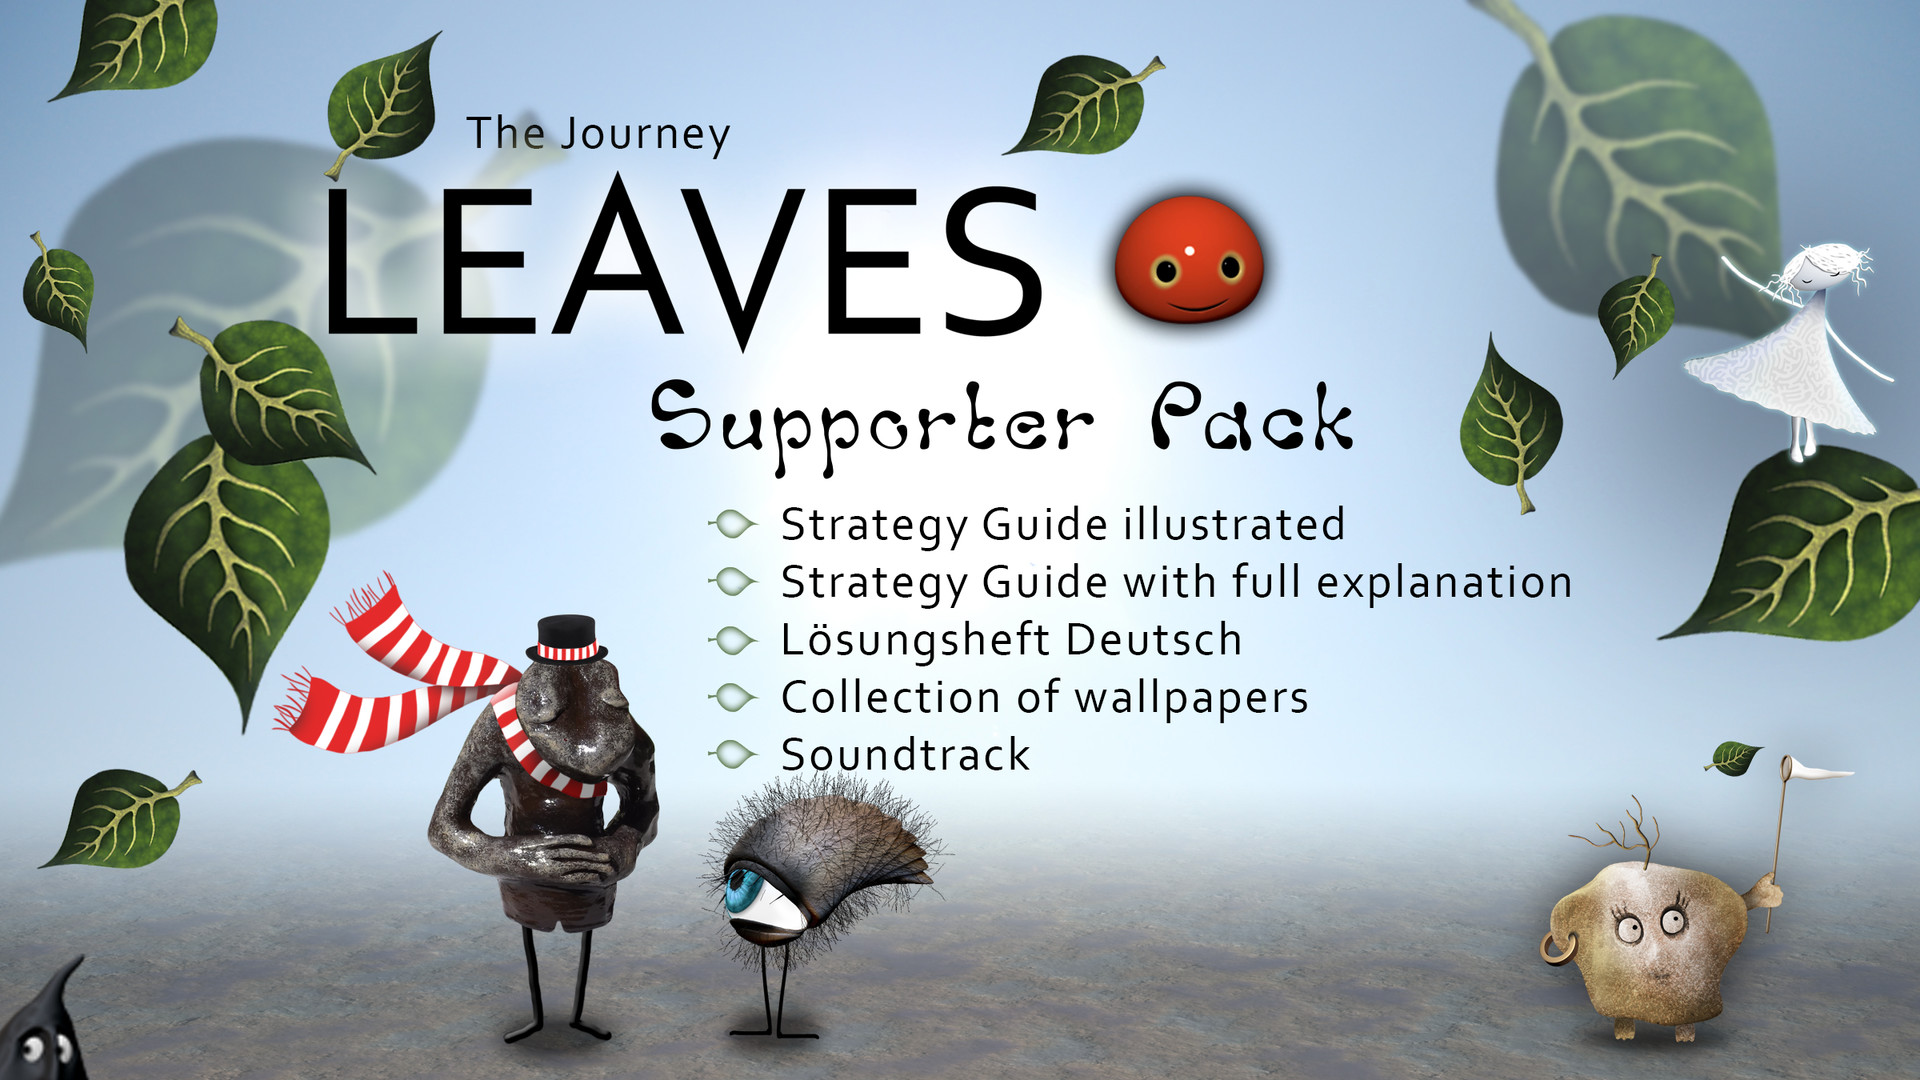 LEAVES - The Journey - Supporter Pack Featured Screenshot #1